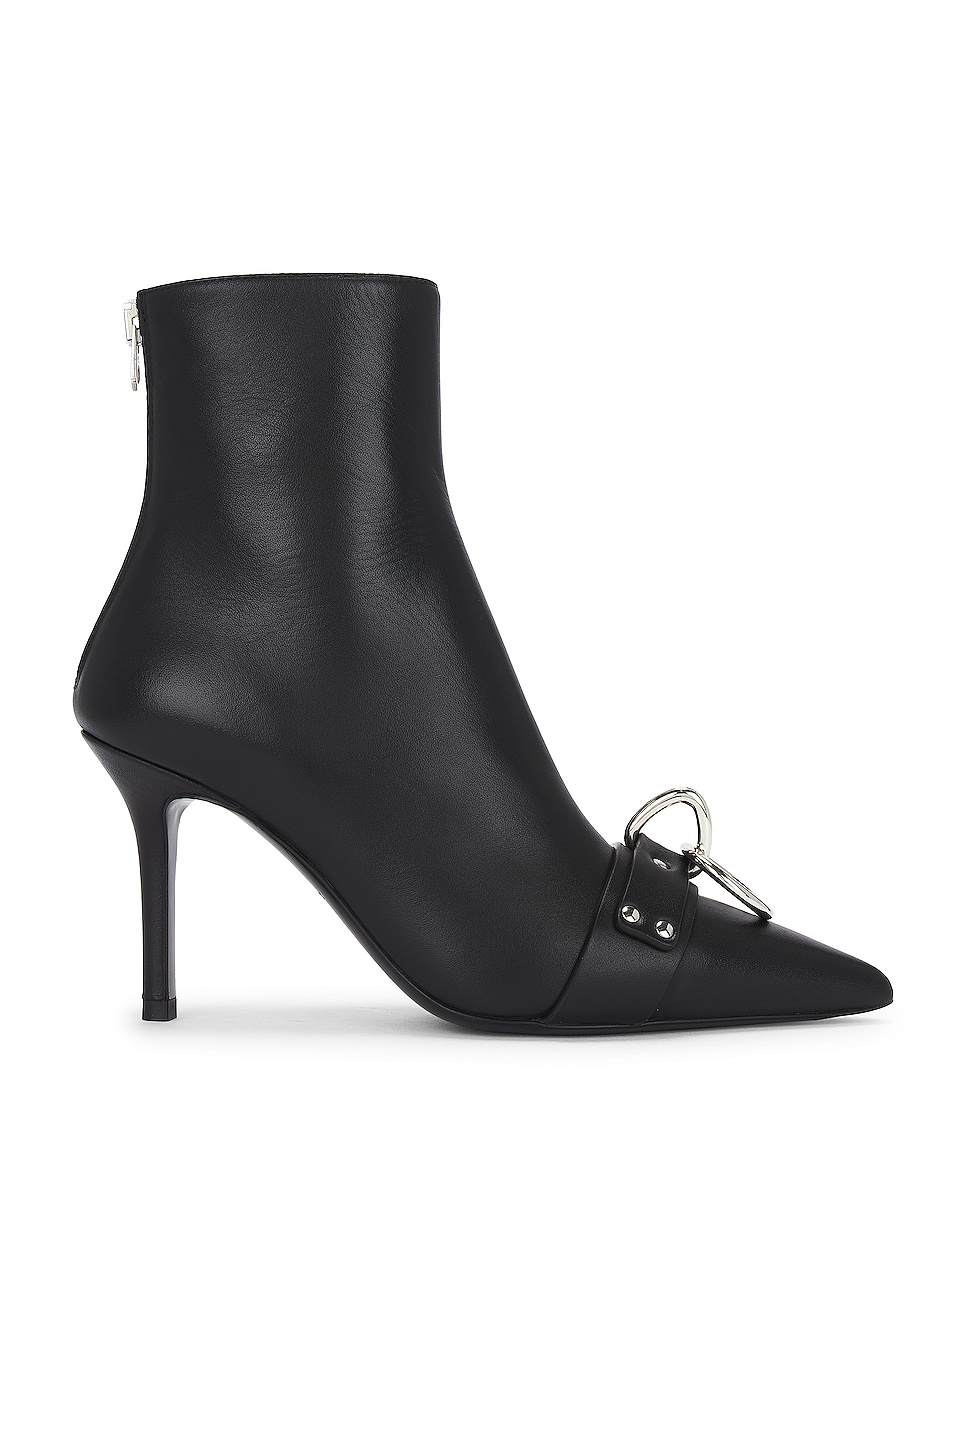 Image 1 of R13 Skinny Ankle Heeled Bootie in Black Leather